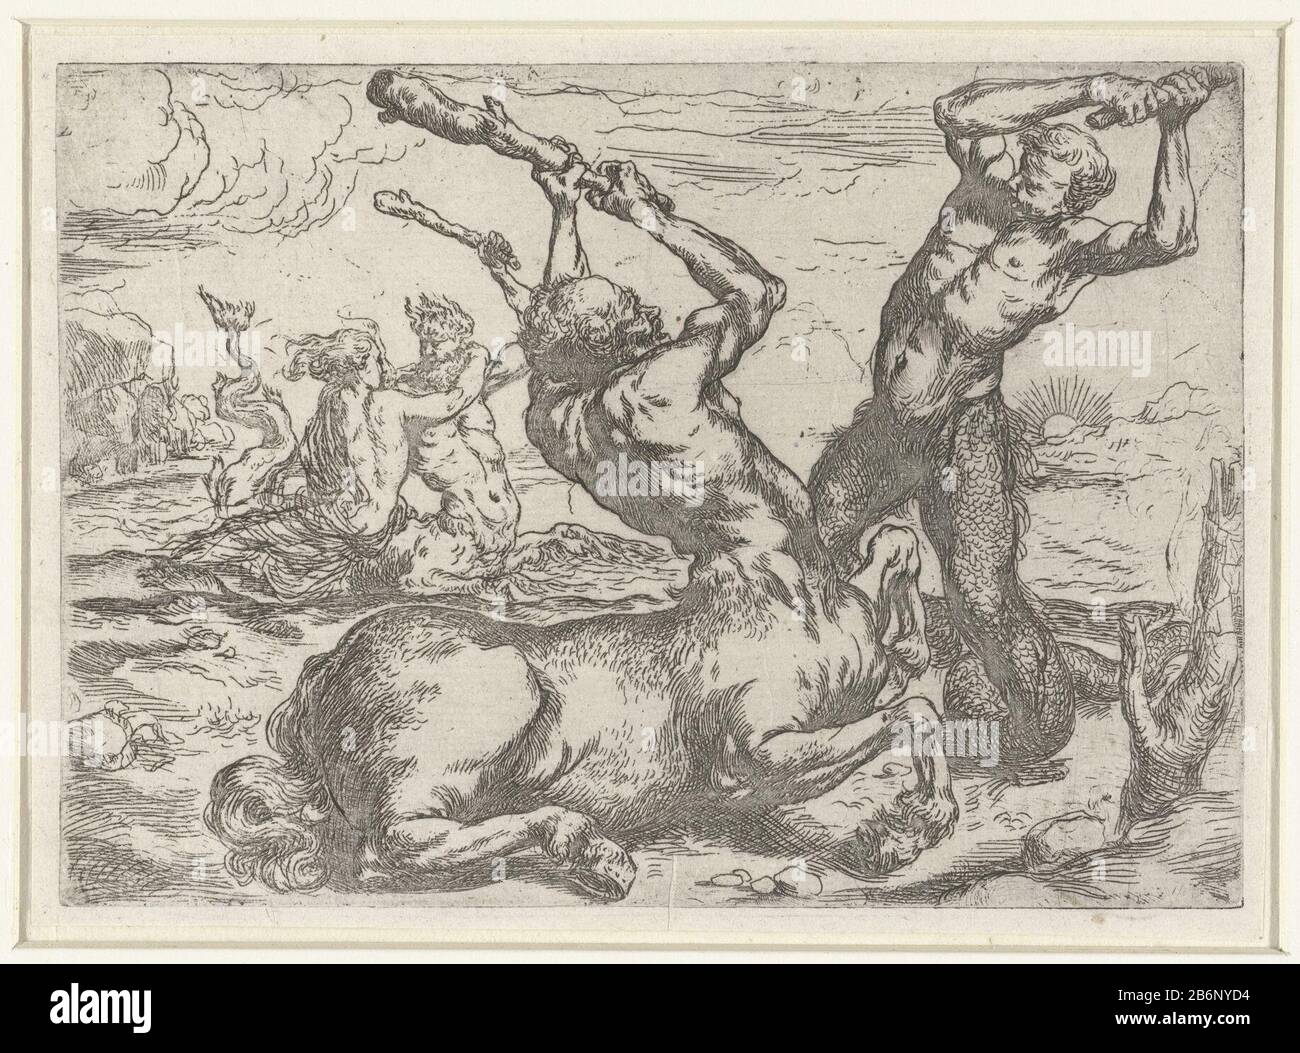 Gevecht tussen een centaur en een triton a centaur and triton fight each other with a club. In the background a fight between a centaur and a triton. Manufacturer : printmaker: anonymous printmaker: Jusepe de Ribera (rejected attribution) Dated: 1620 - 1700 Physical features: etching material: paper Technique: etching Dimensions: plate edge: H 115 mm × W 162 mm Subject: triton (s) (+ aggressive, unfriendly activities and relationships) centaurs (+ aggressive, unfriendly activities and relationships) Stock Photo